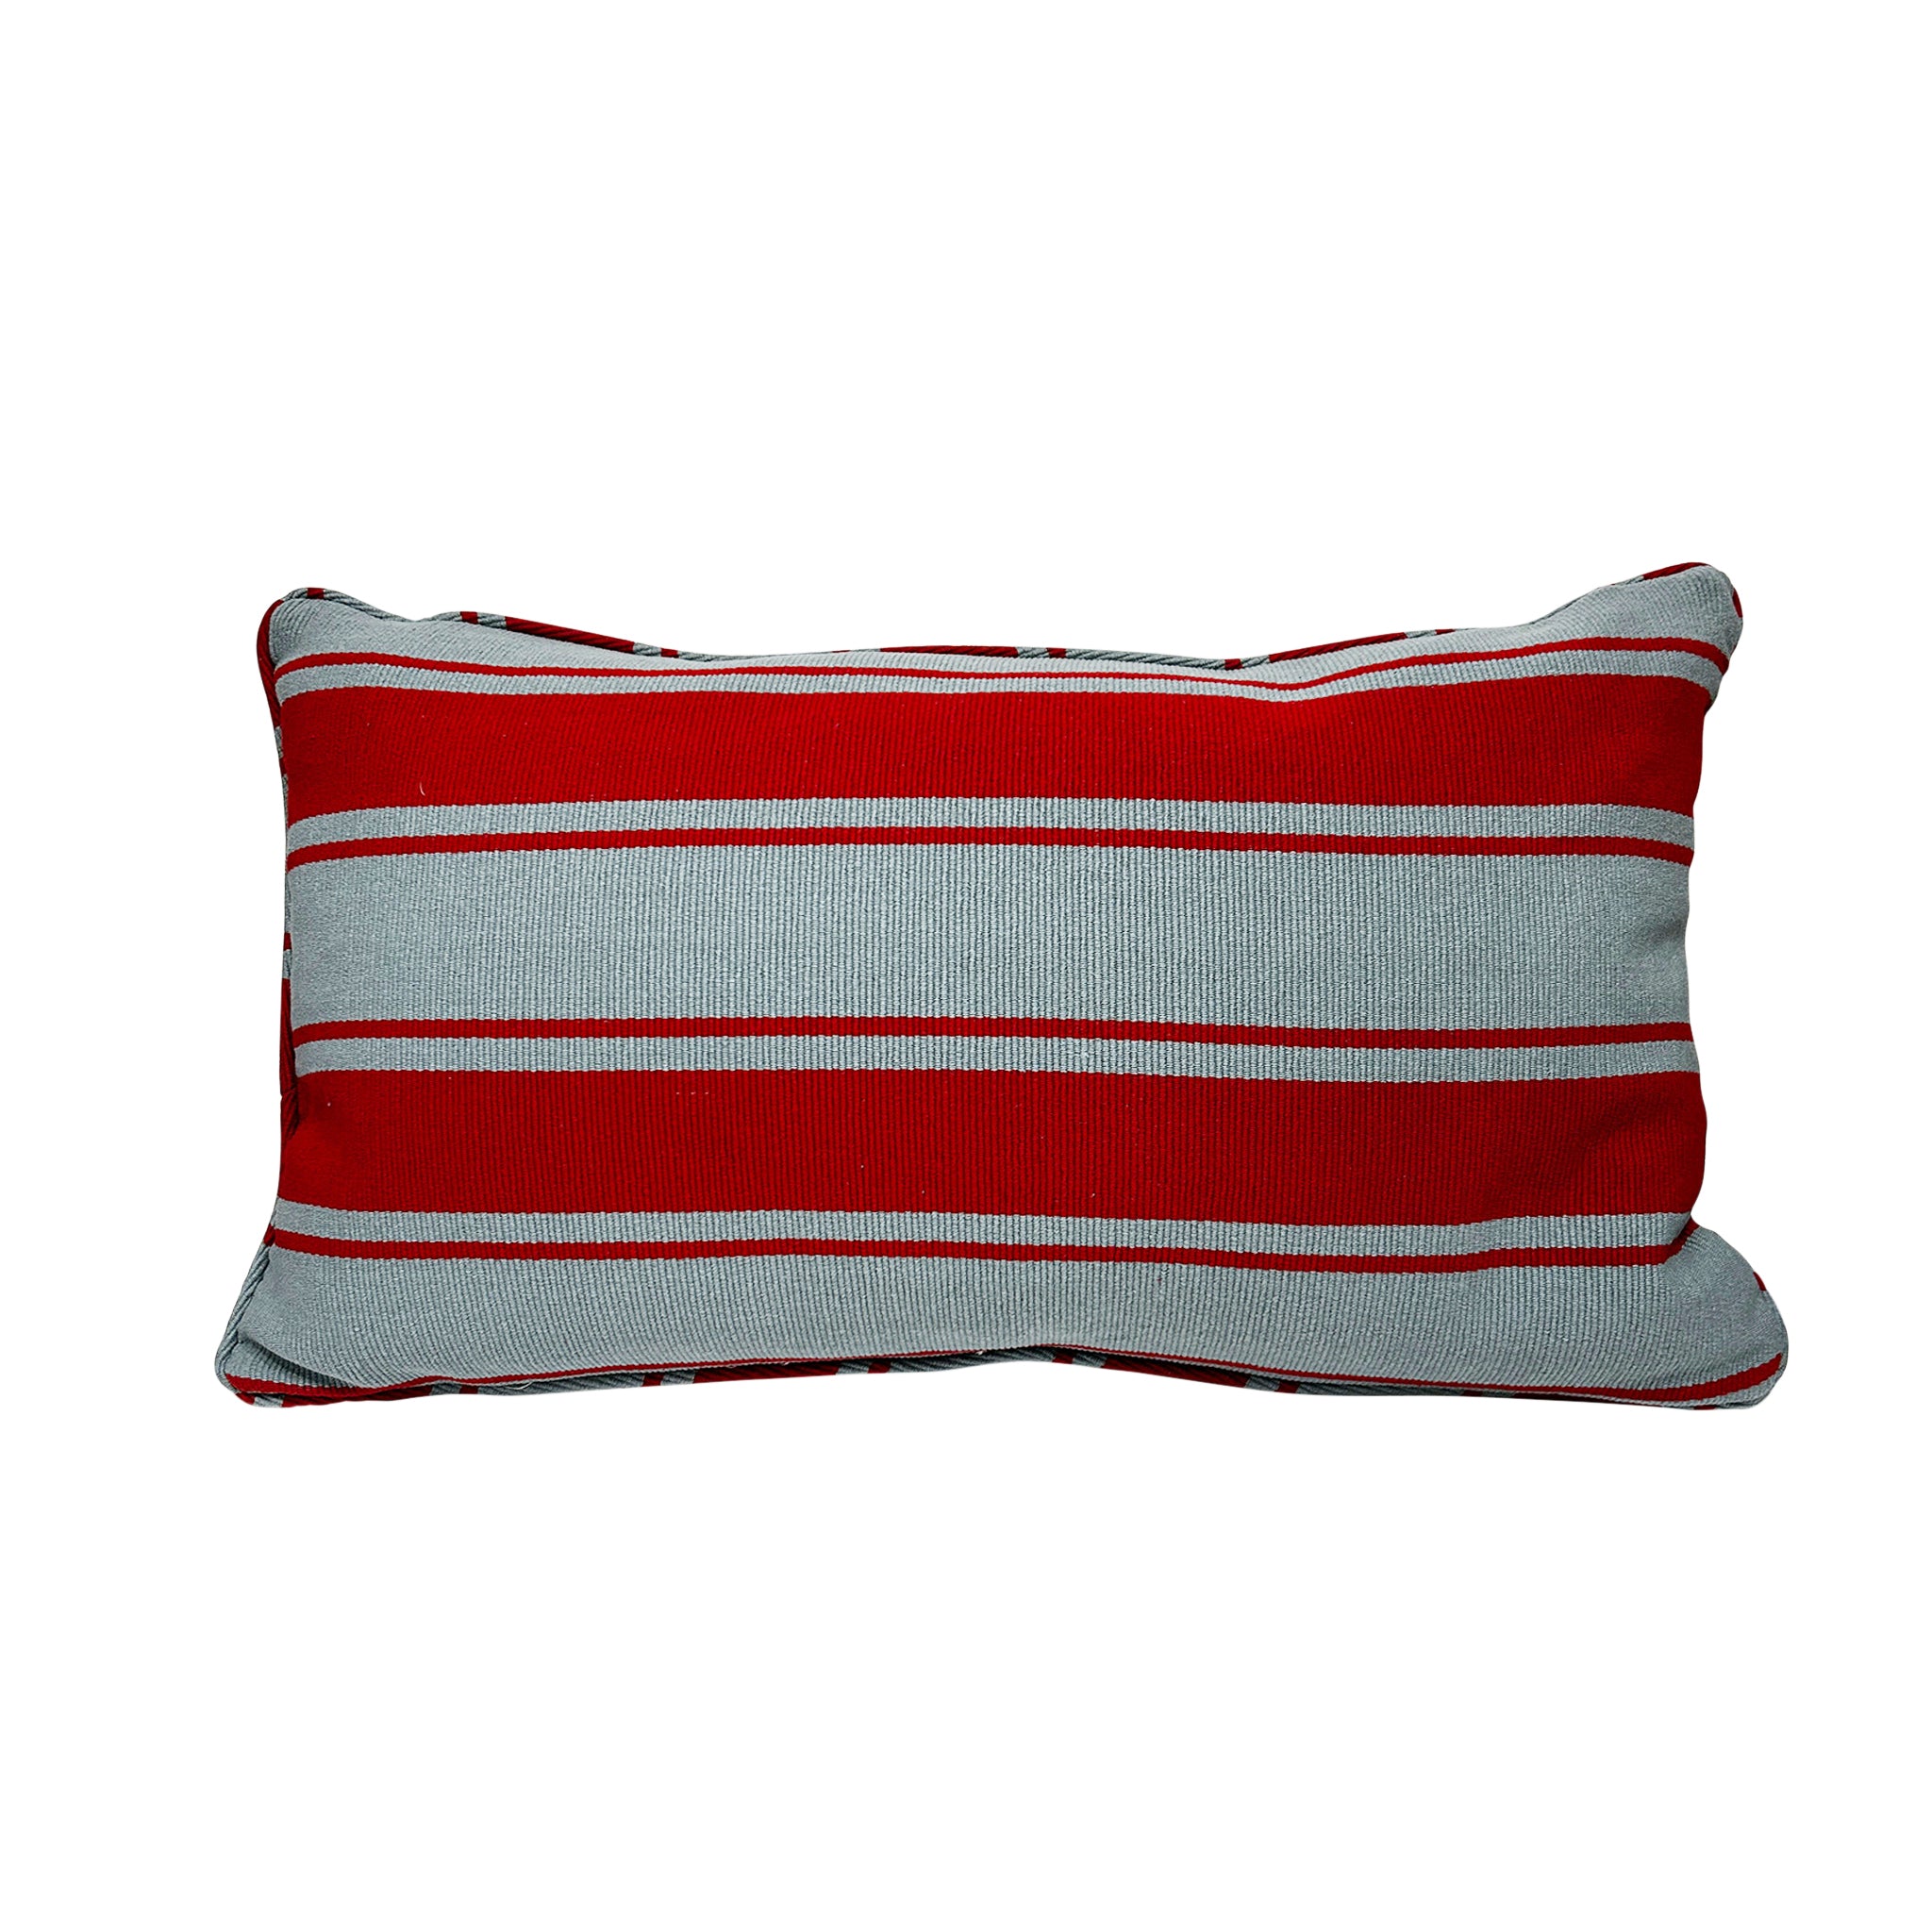 Tangier Stripe in Teal & Red Pillow